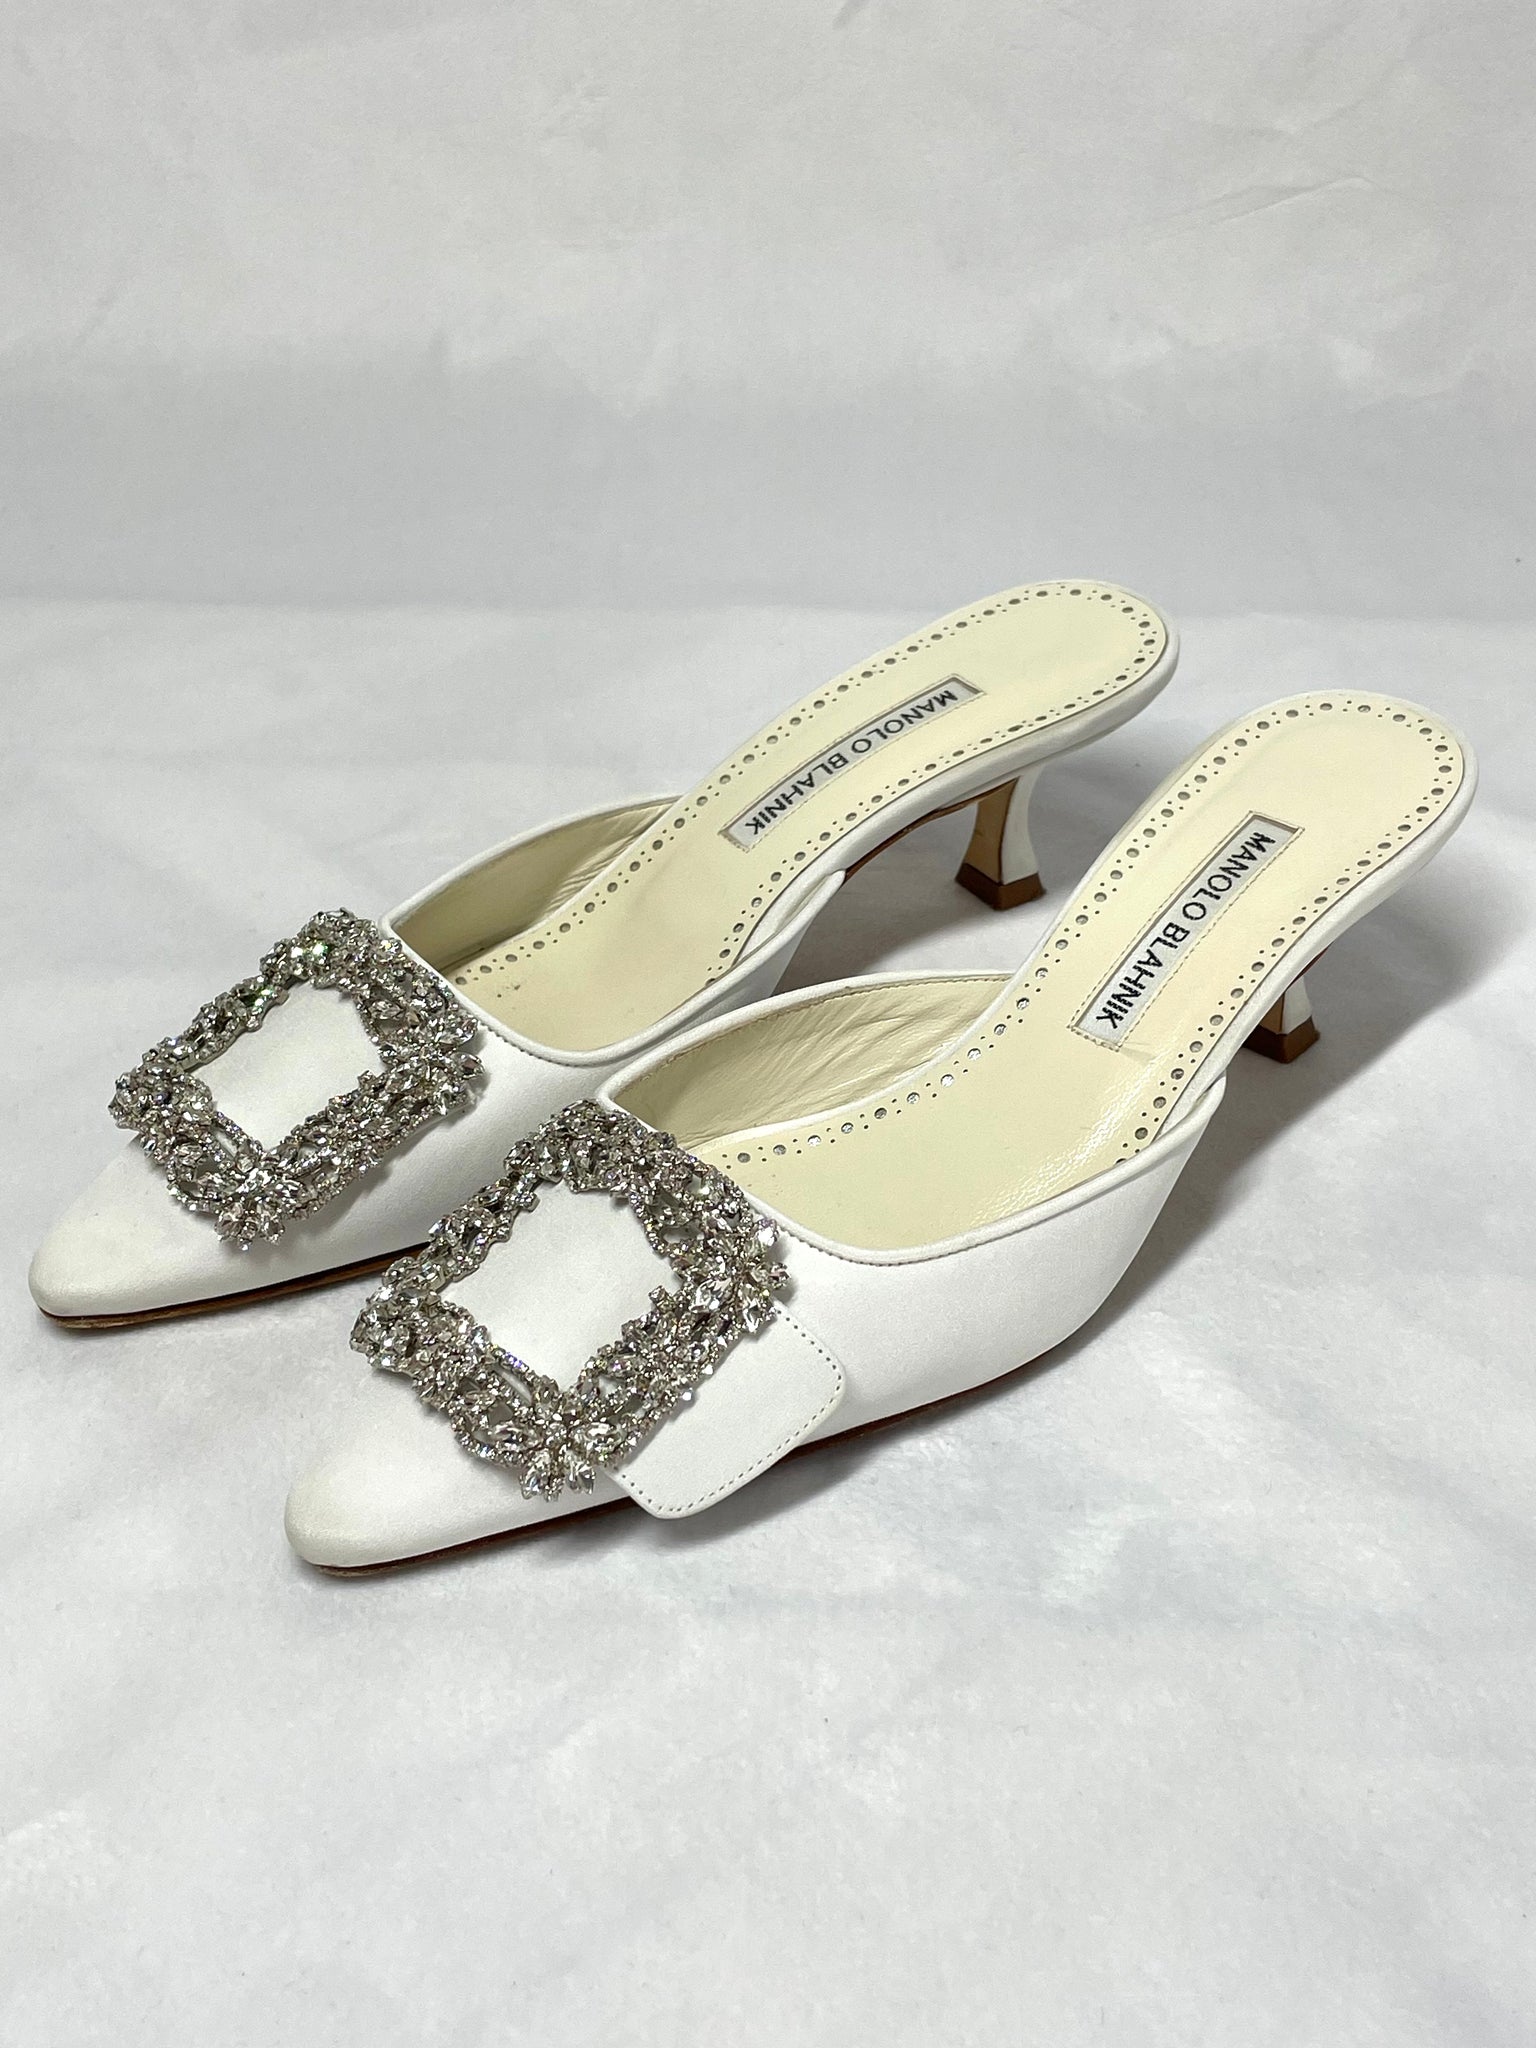 Pre Loved Manolo Blahnik Maysale Bride 37 in White Silk and Silver Embellishments Kitten Heel Mules available at UniKoncept in Waterloo